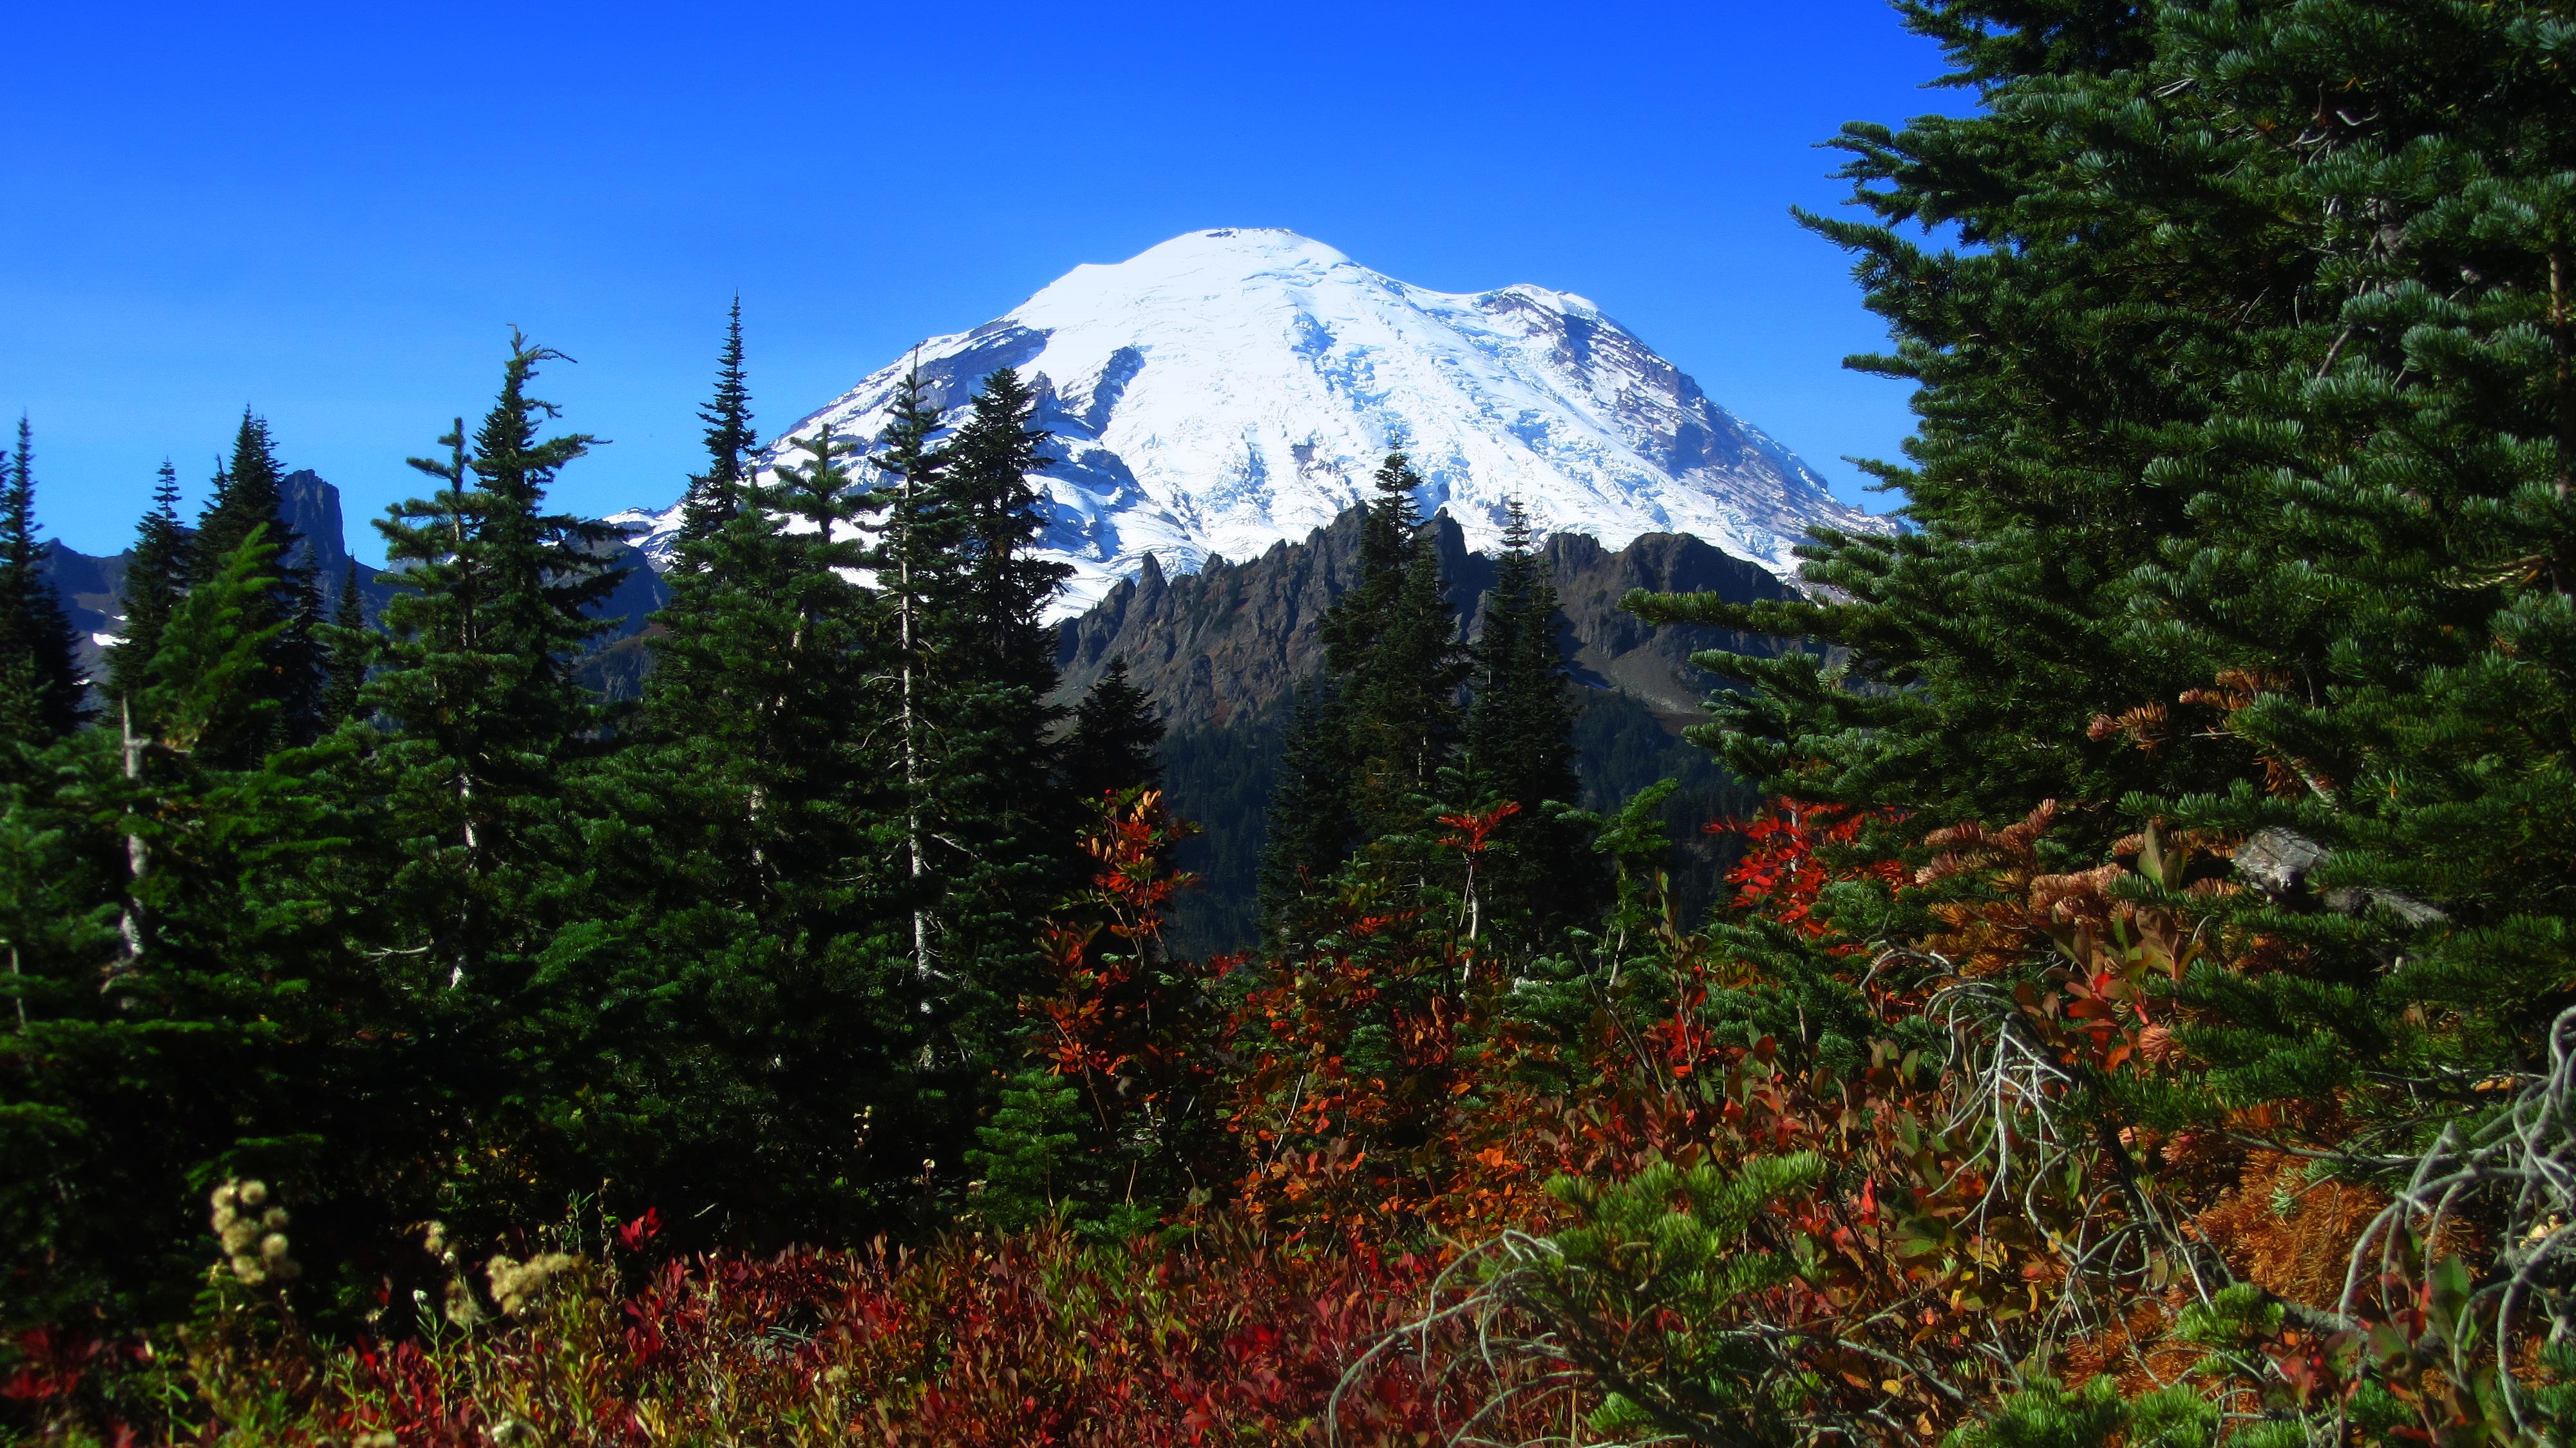 Rainier 4K wallpaper for your desktop or mobile screen free and easy to download